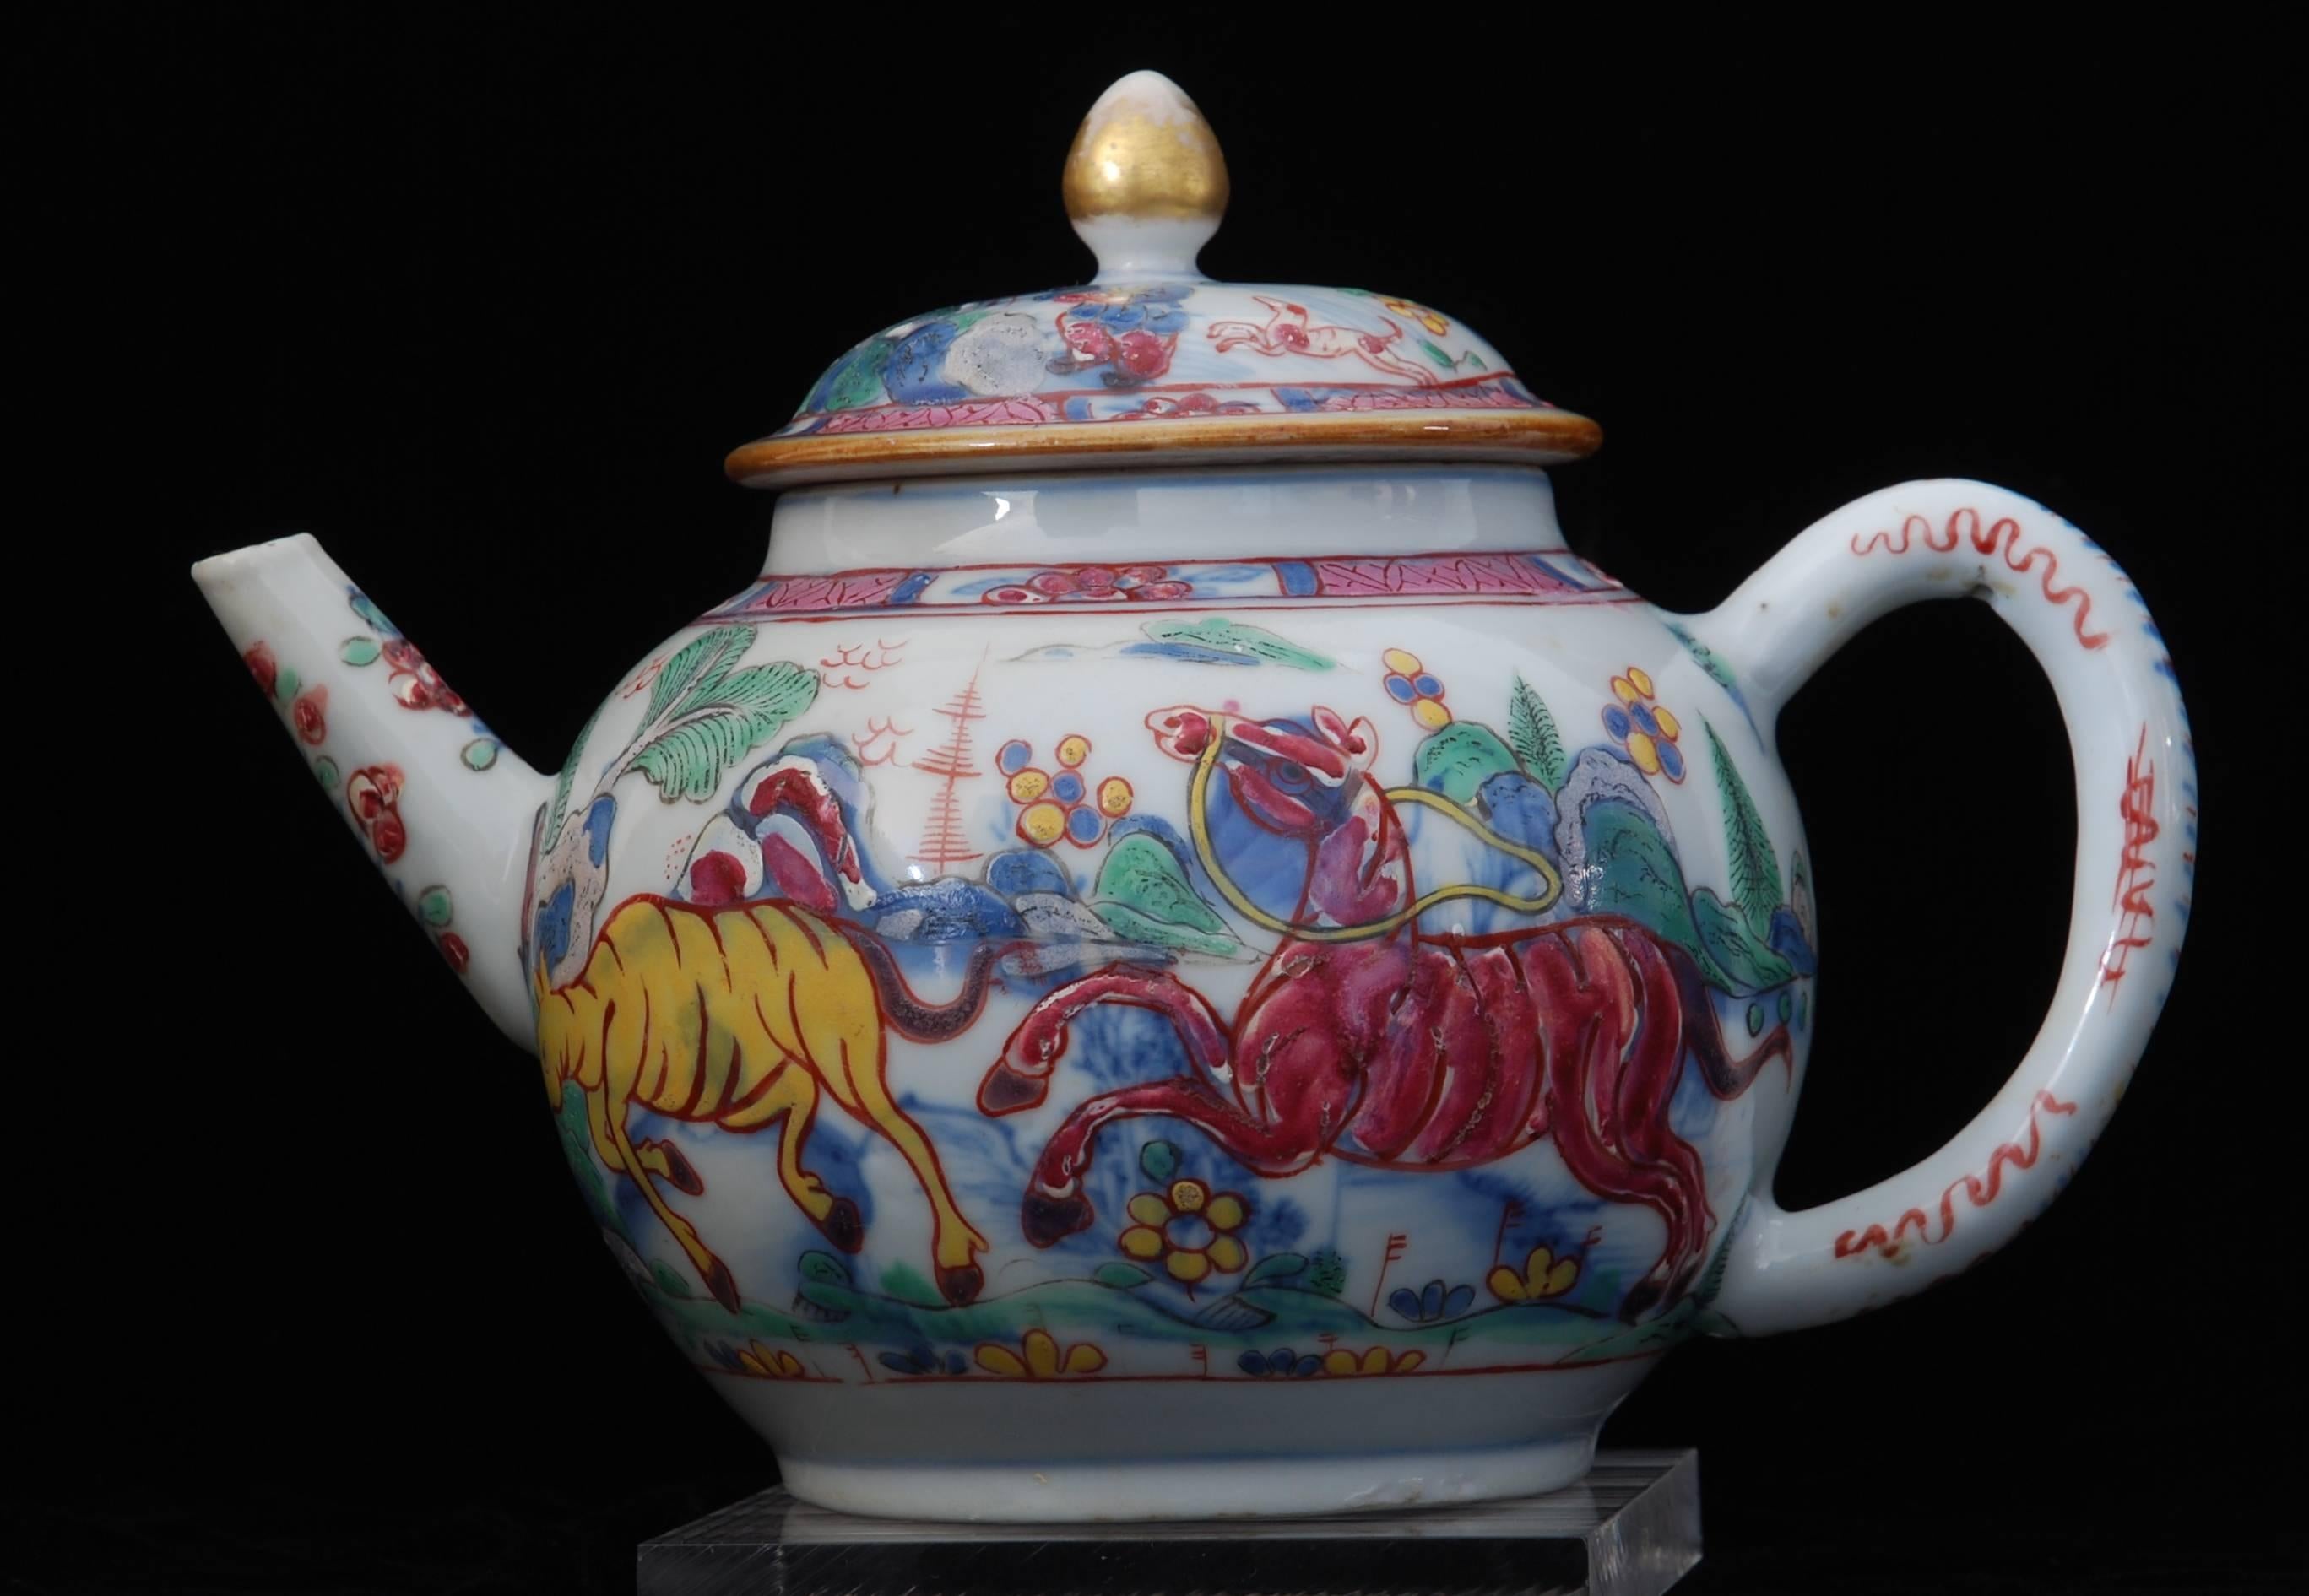 Chinese porcelain teapot decorated in under-glaze blue; decorated in (probably) London with colourful horses, a man, birds and insects.